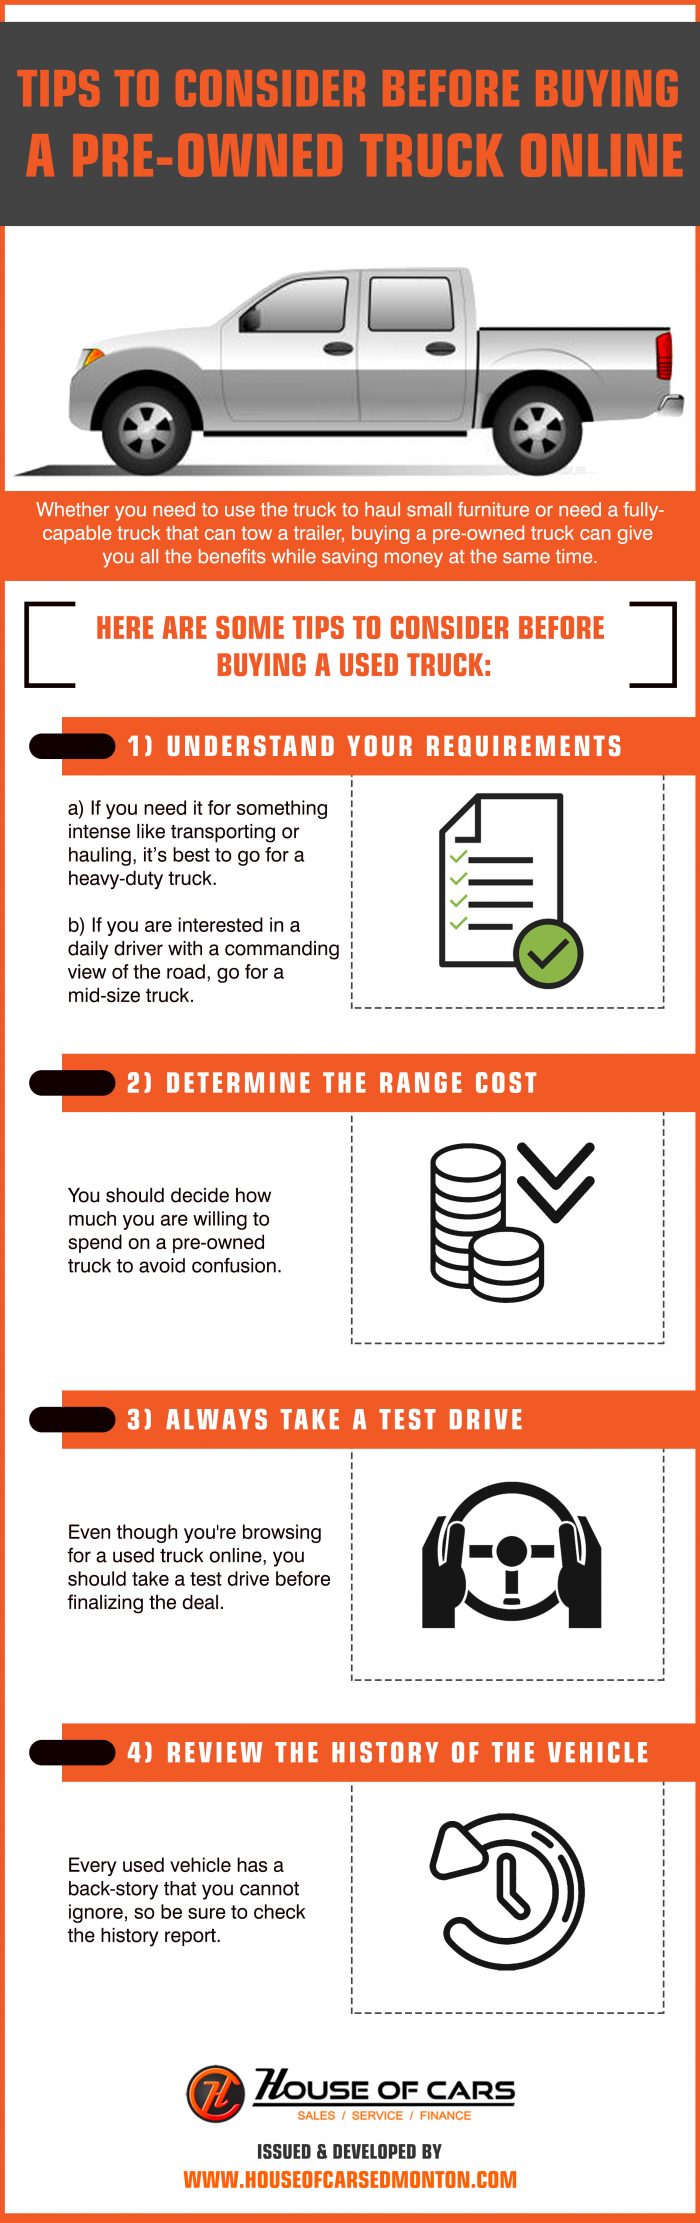 Tips to Consider Before Buying a Pre-owned Truck Online